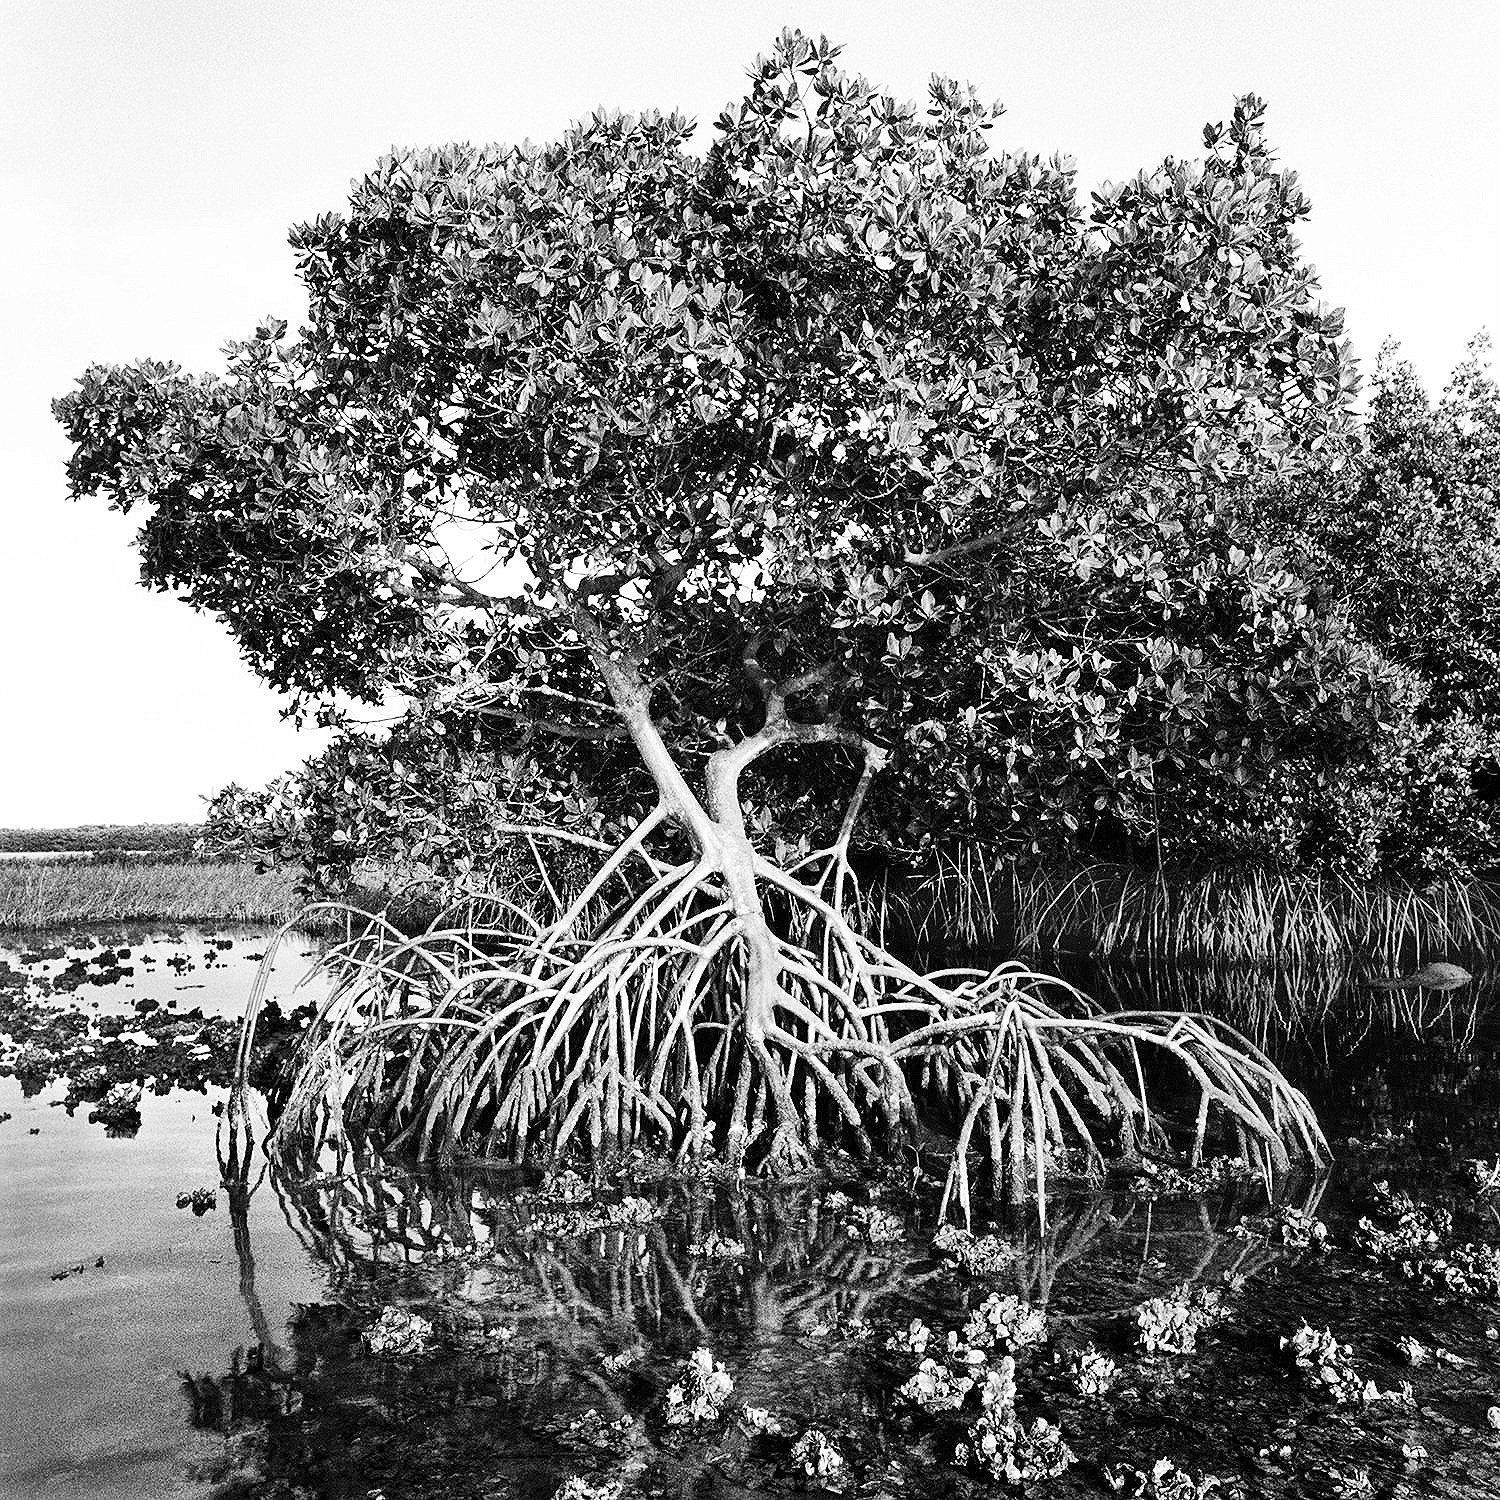 Red Mangrove Tree & Oyster Beds, Moonshine Island